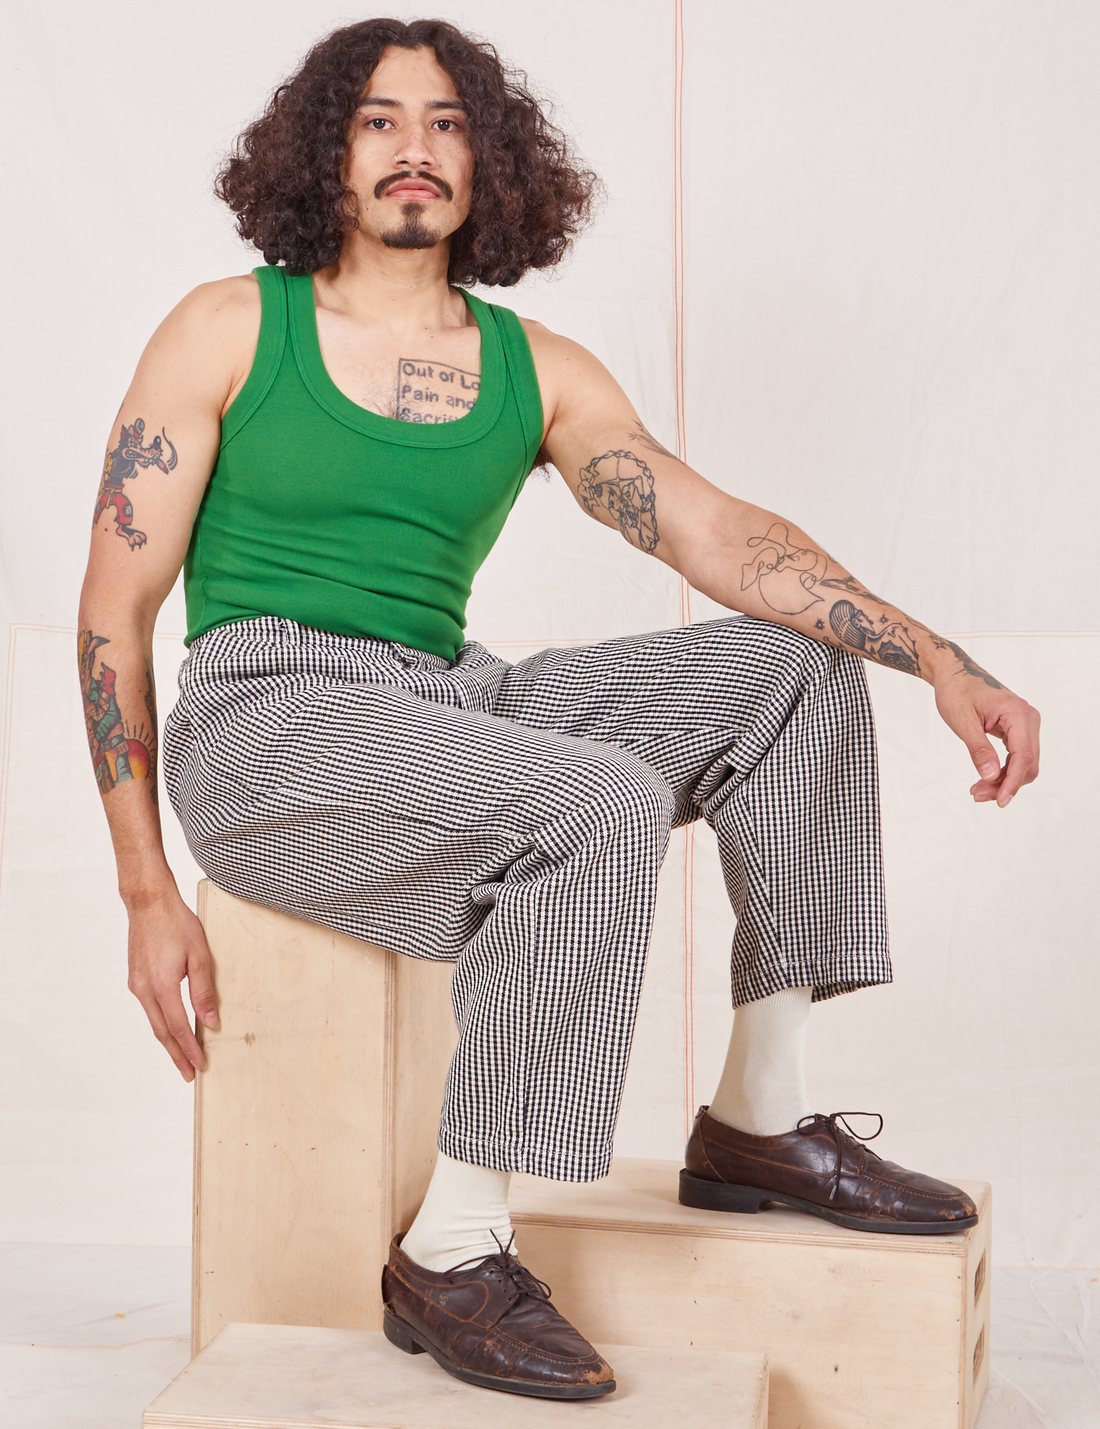 Jesse is sitting on a wooden crate wearing Checker Trousers in Black & White and forest green Tank Top